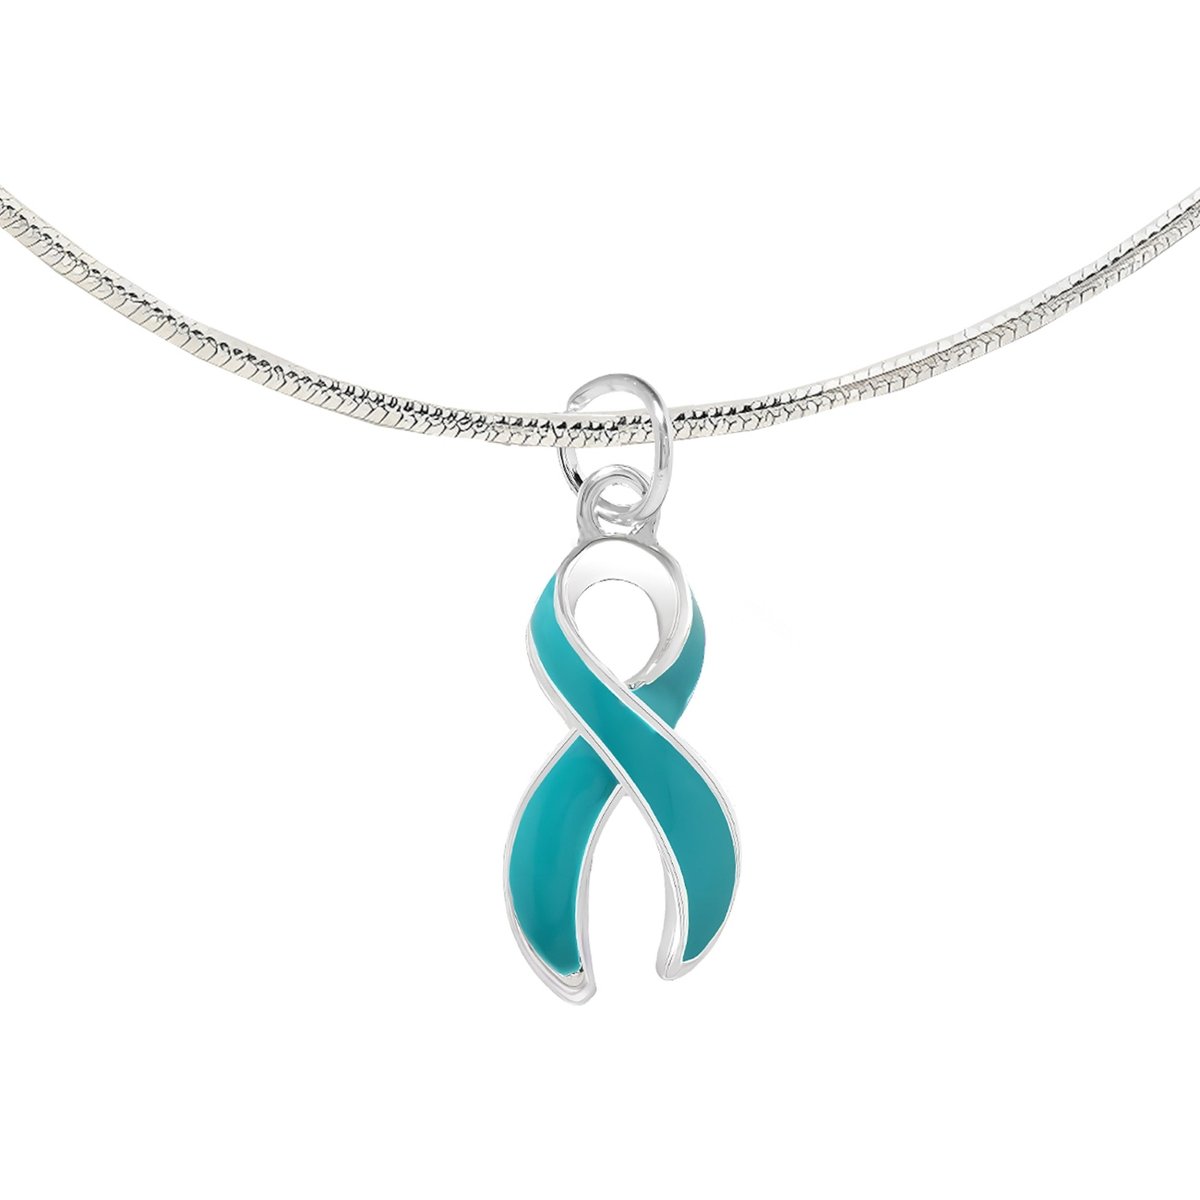 Large Teal Ribbon Necklaces - Fundraising For A Cause